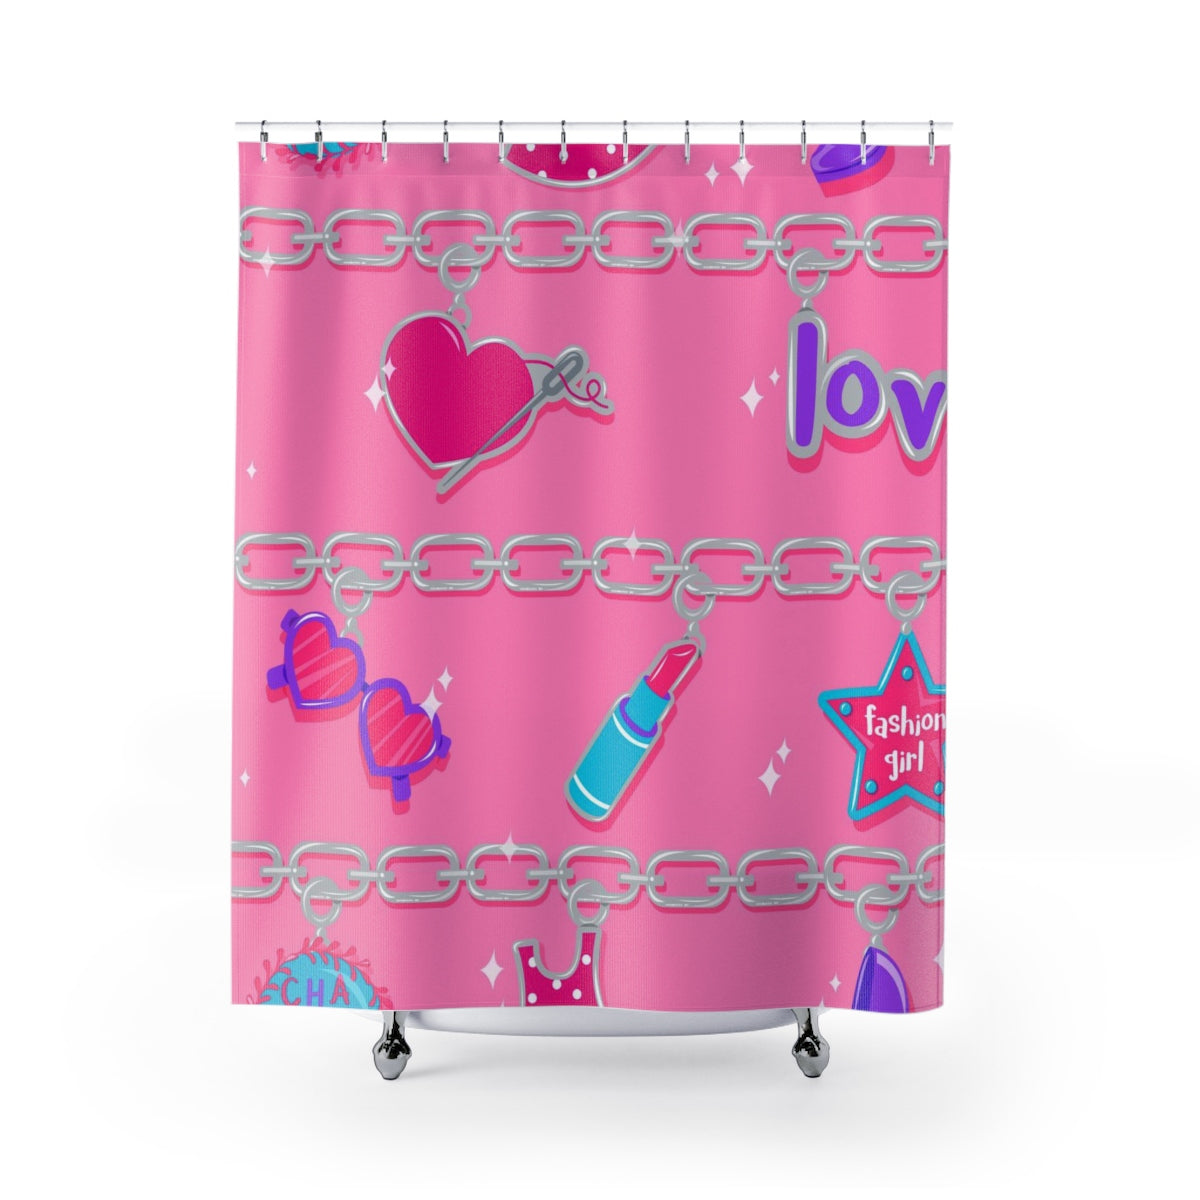 CHARMED SHOWER CURTAIN 71"x74"